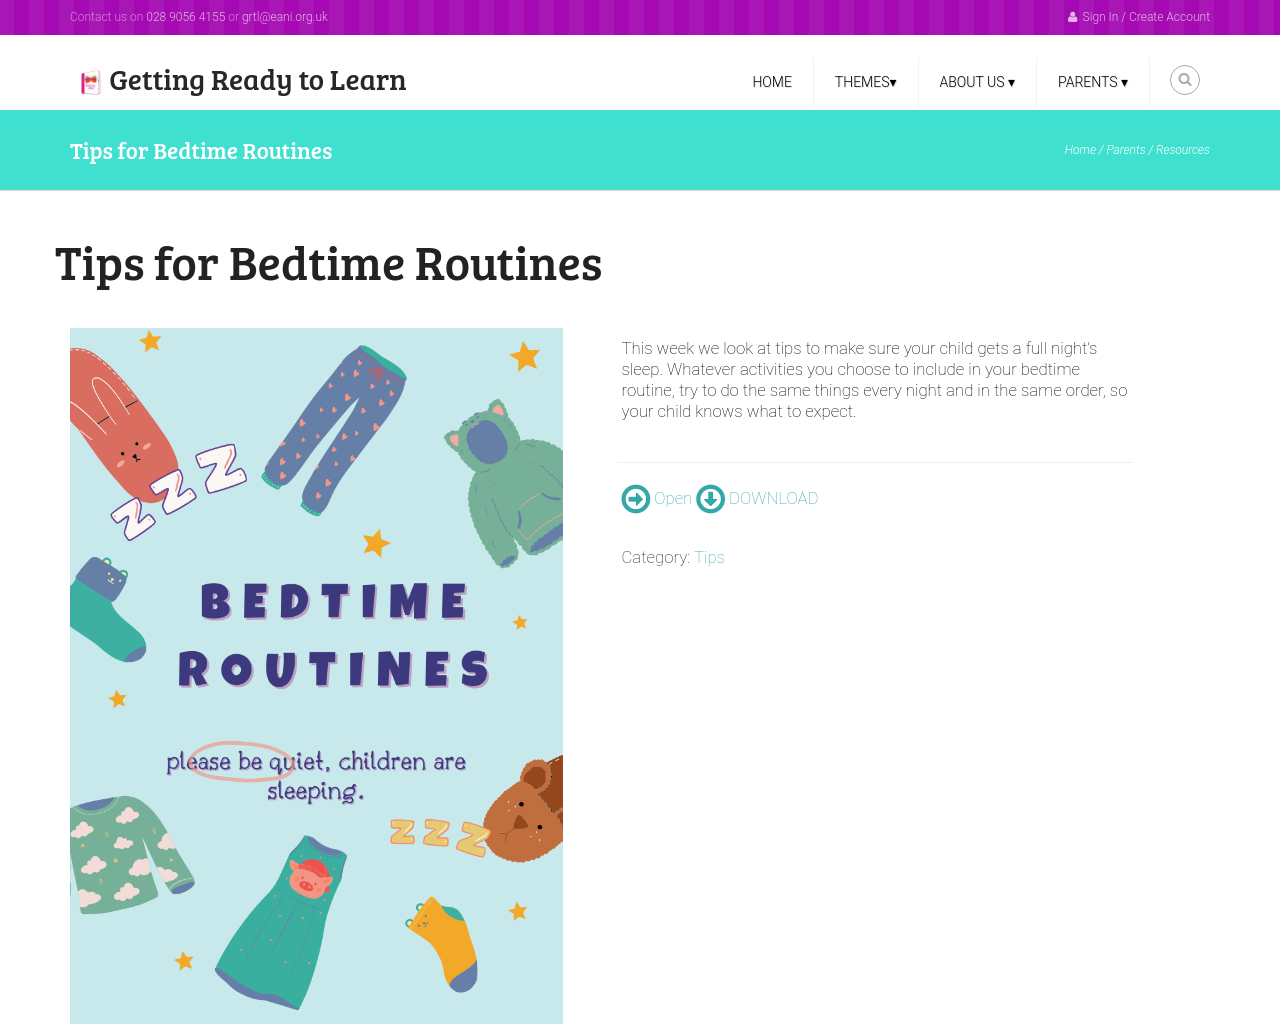 Tips for Bedtime Routines